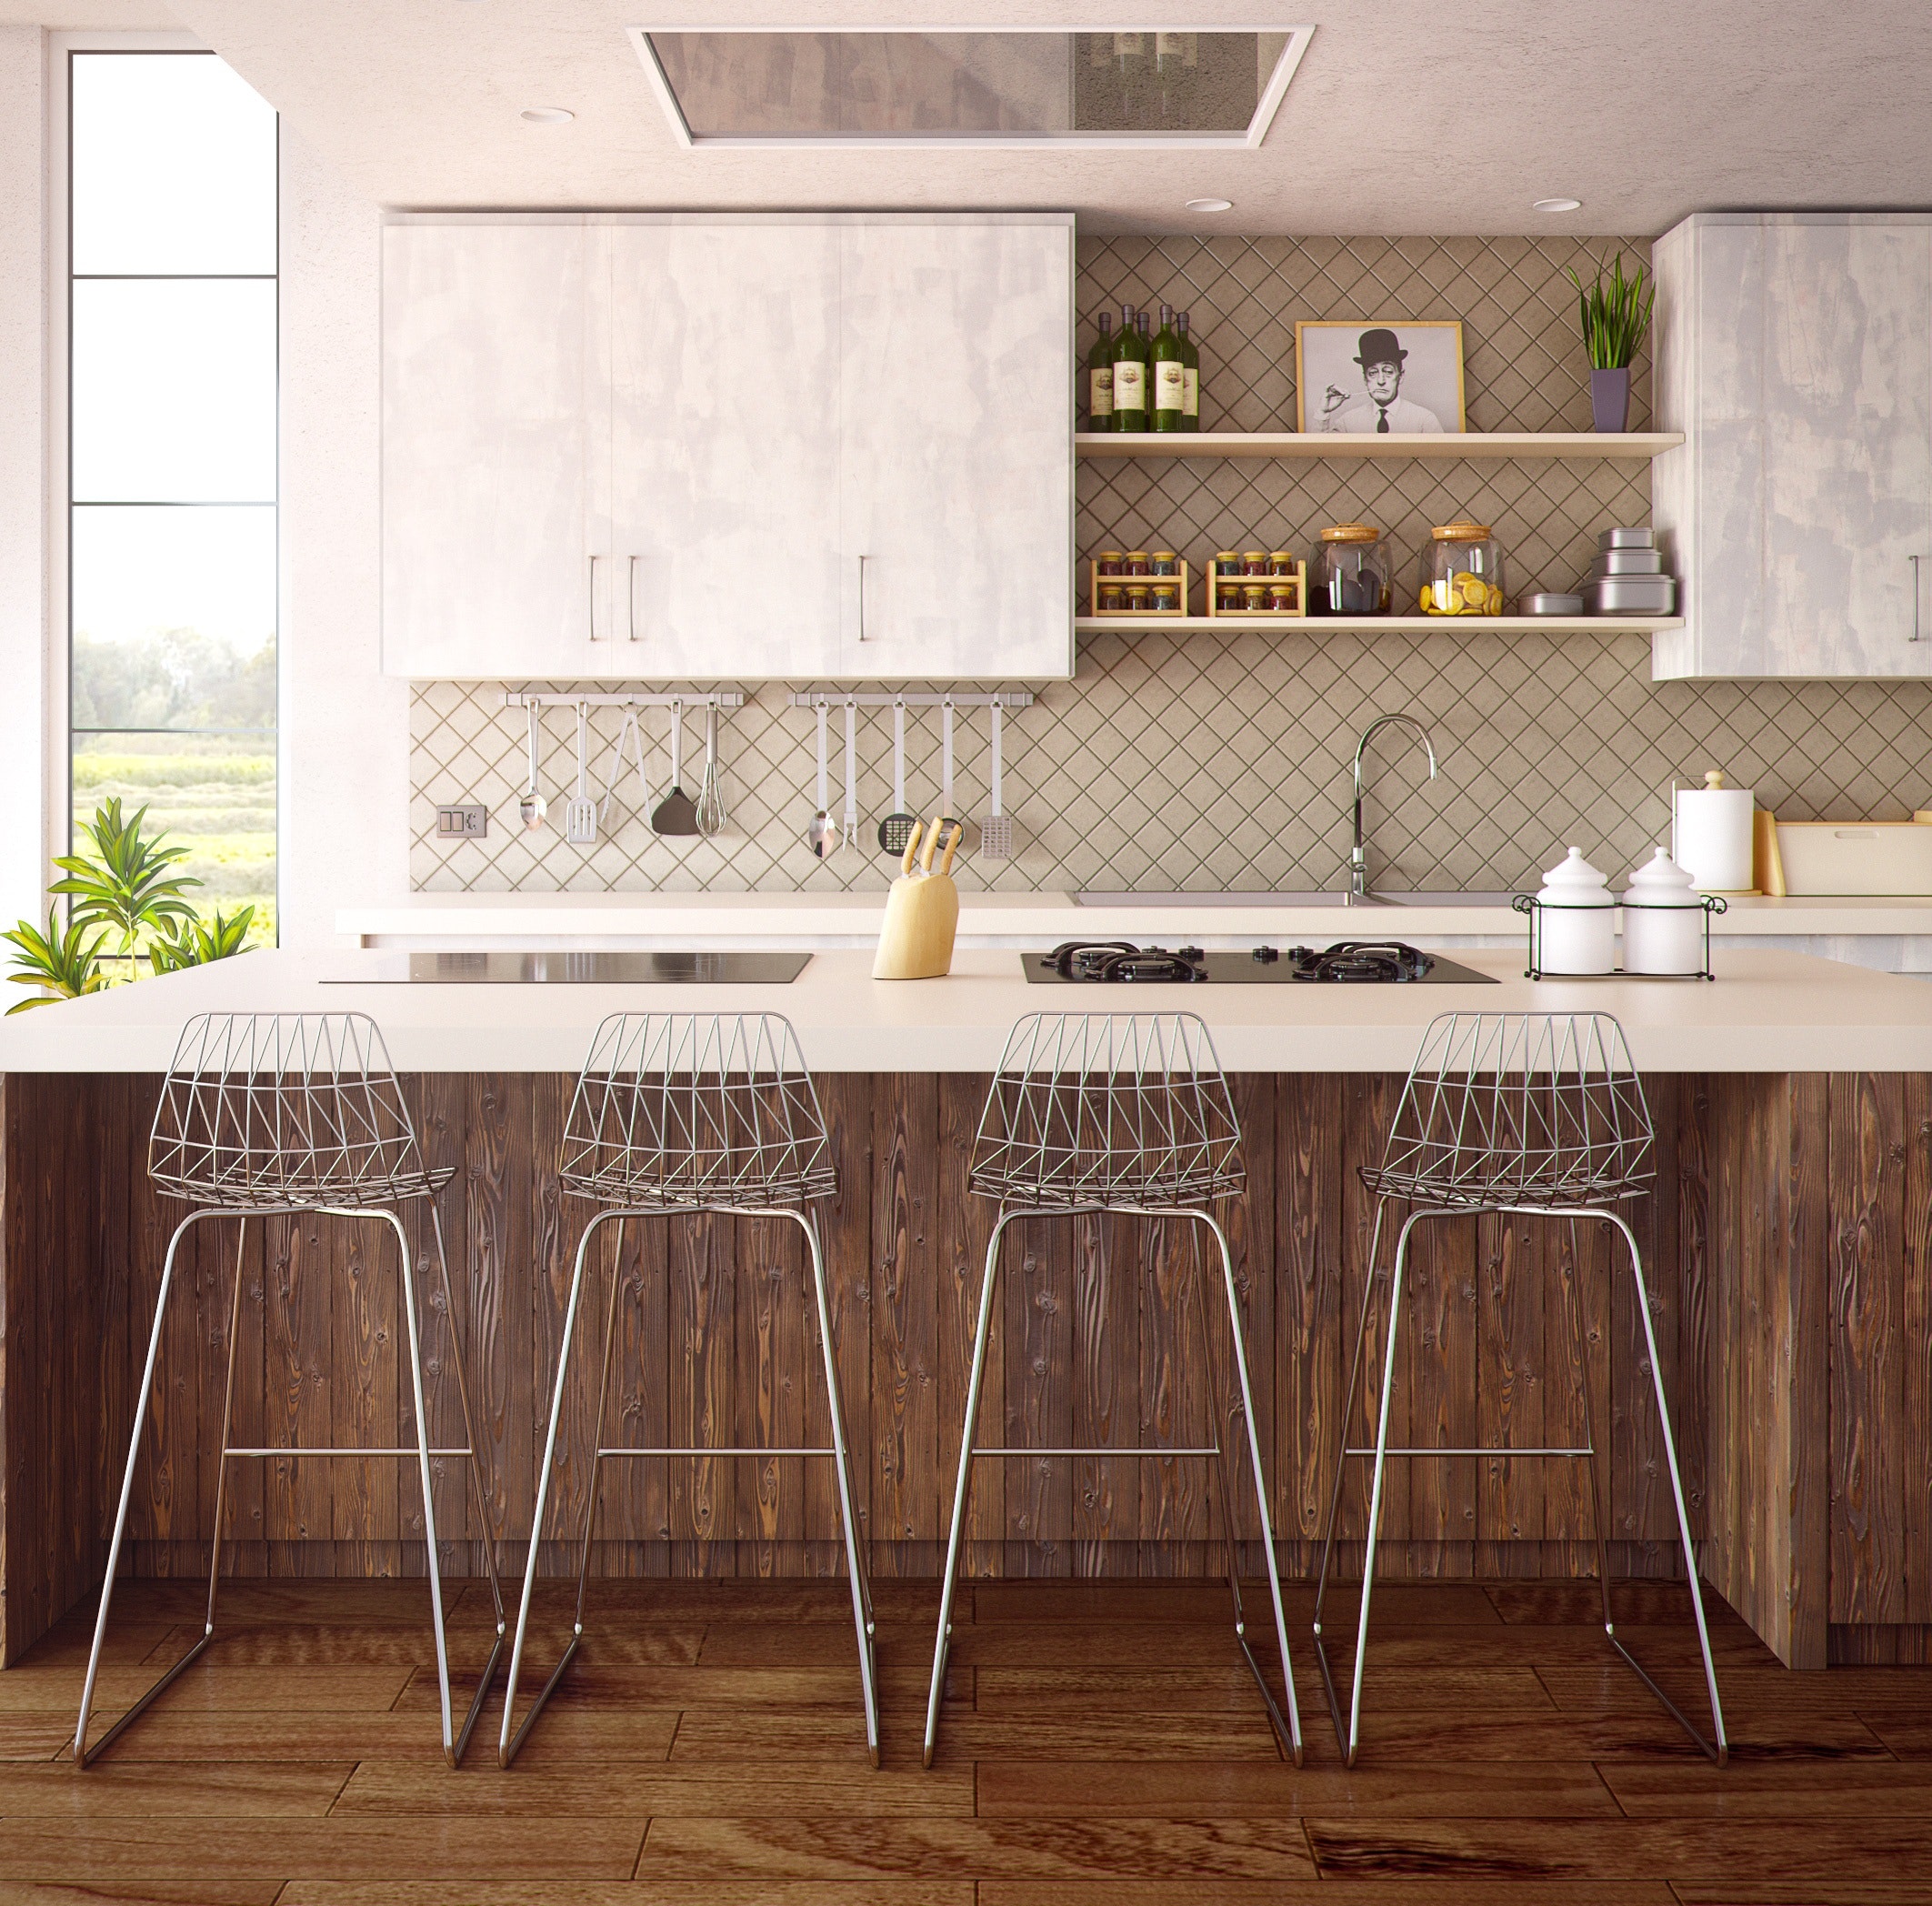 Top 5 Reasons The Kitchen Is the Heart of Your Home